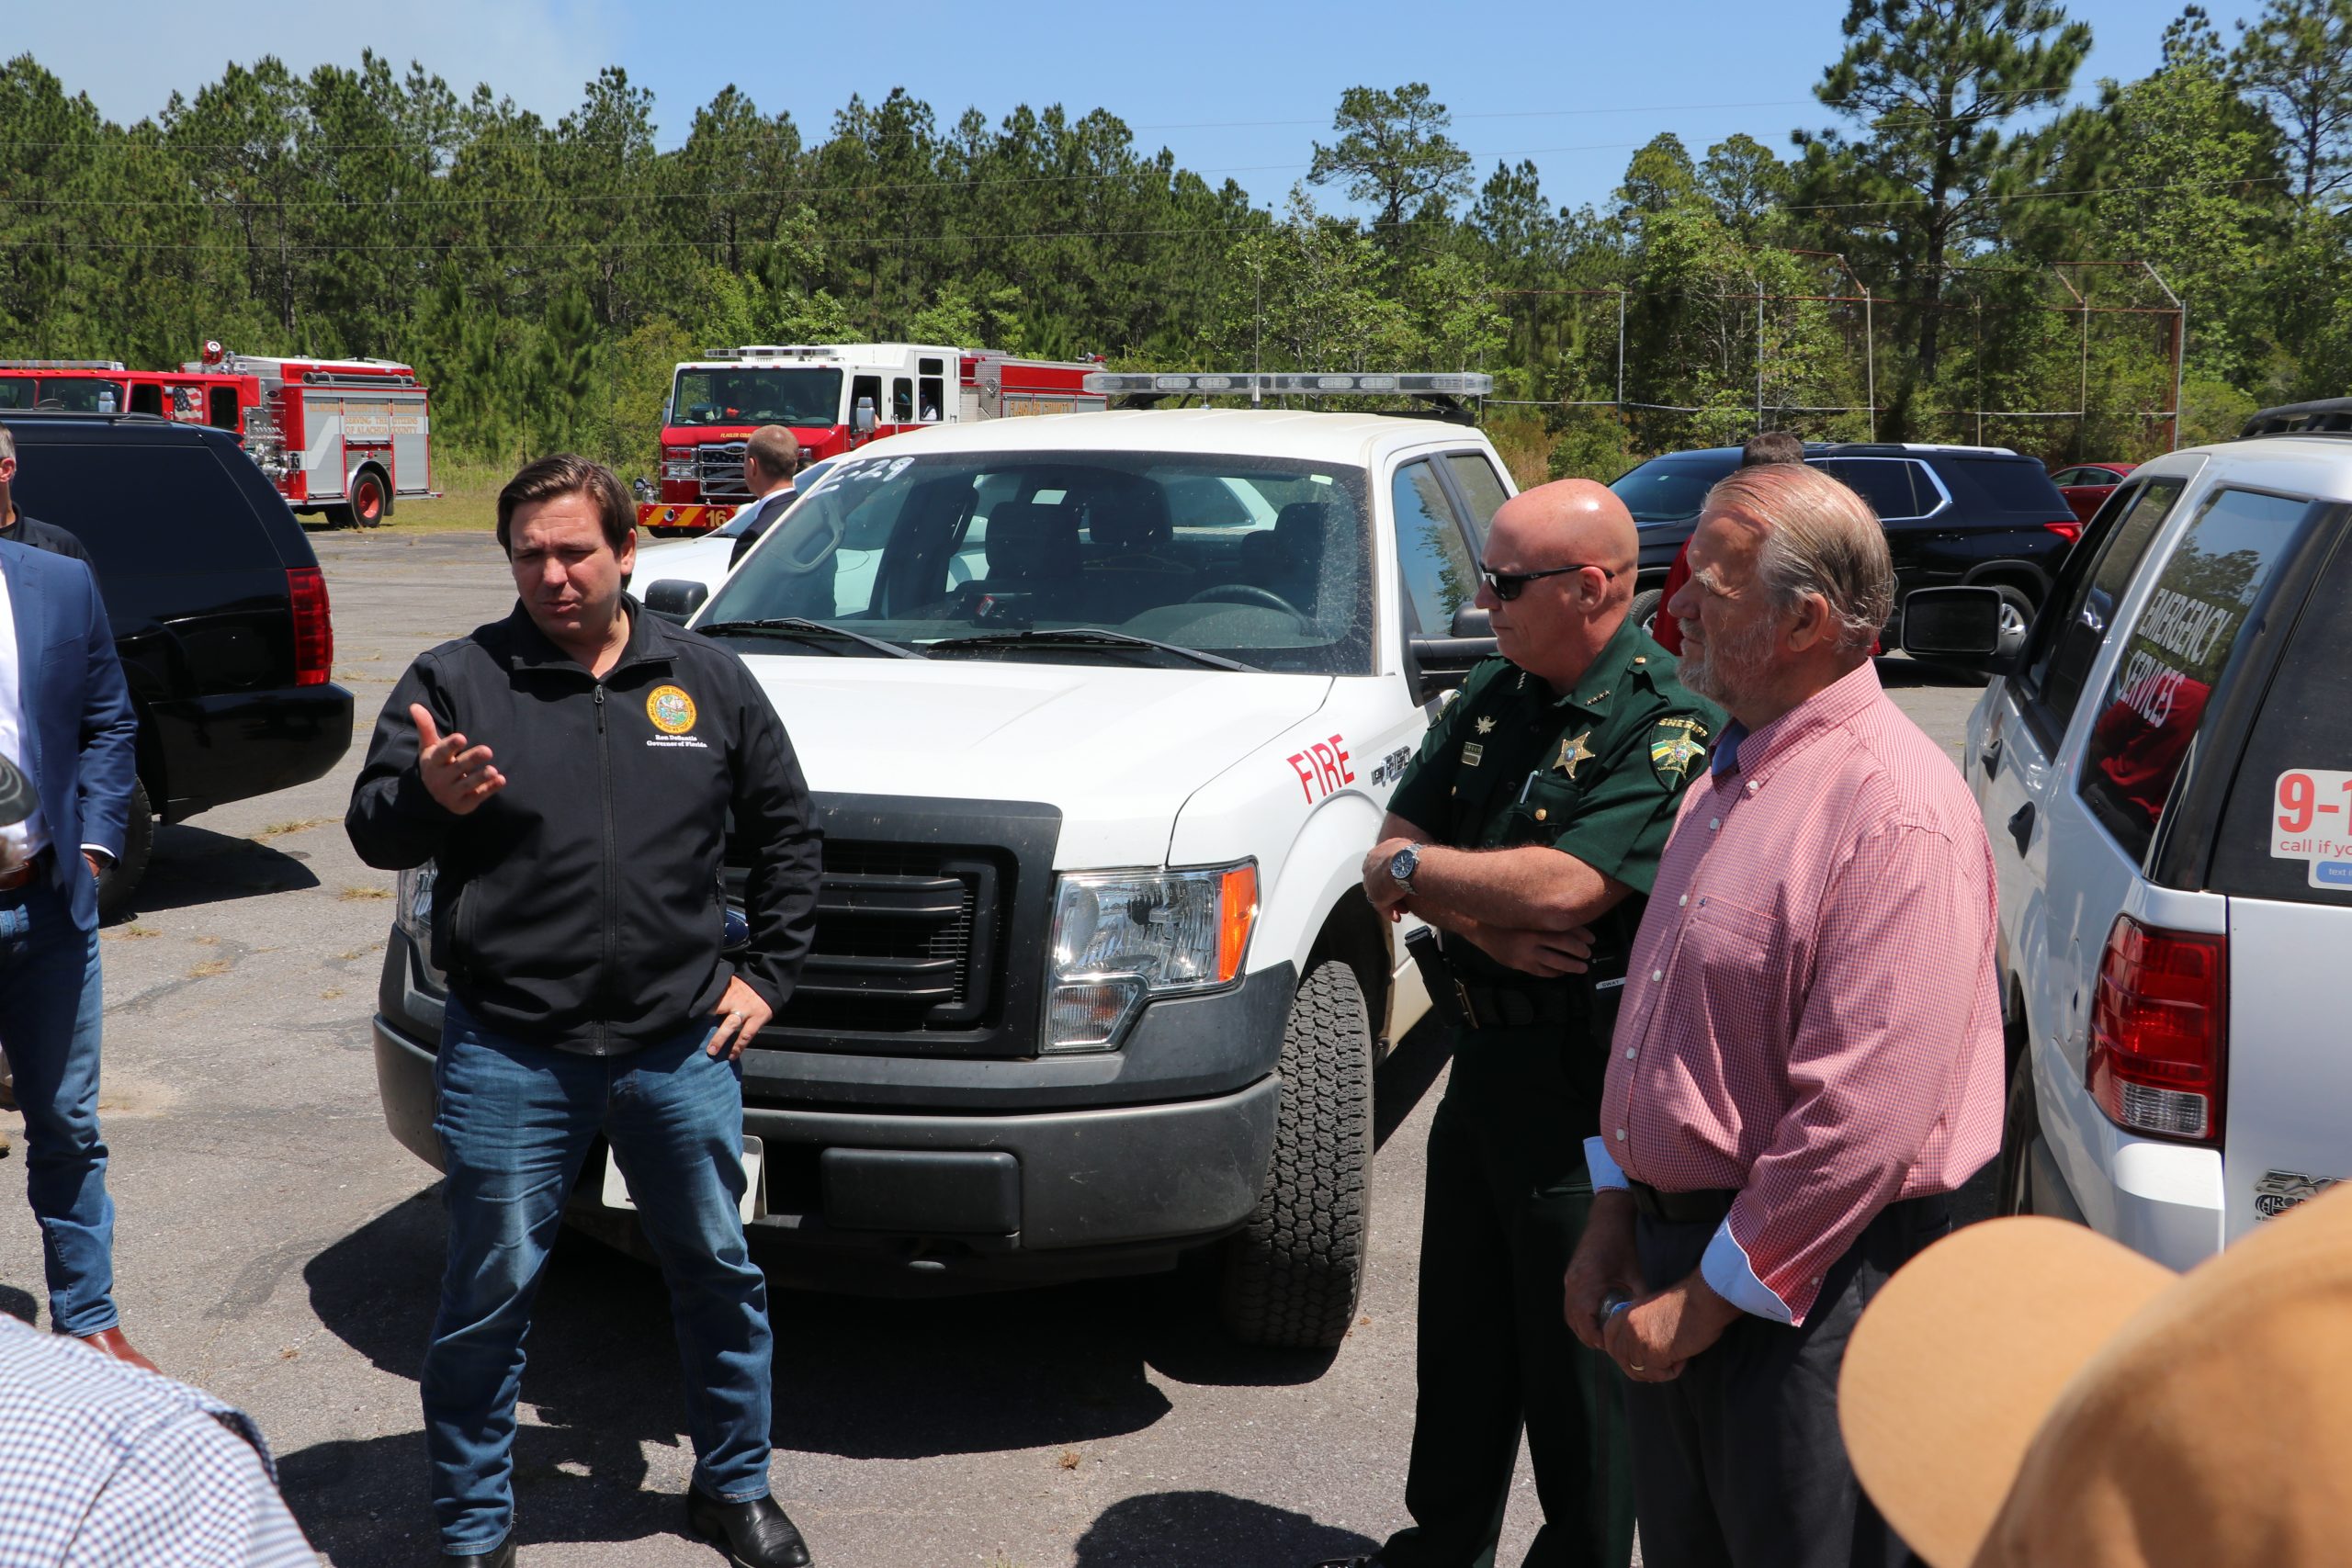 Governor and sheriff discuss with officials in parking lot filled with emergency vehicles under sunny skies.